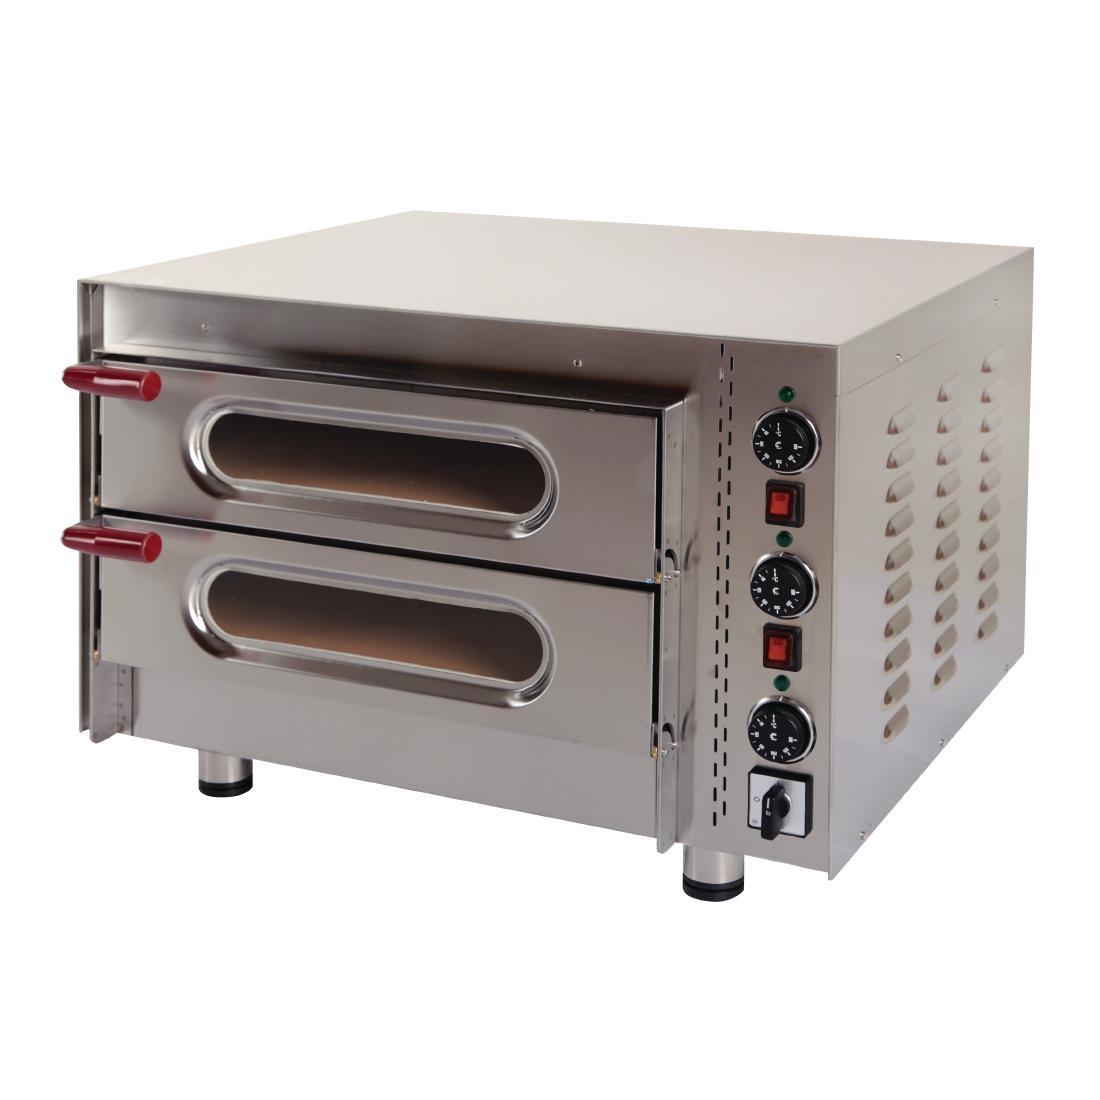 Little Italy Midi Electric Pizza Oven 50/2 - FP741  - 1